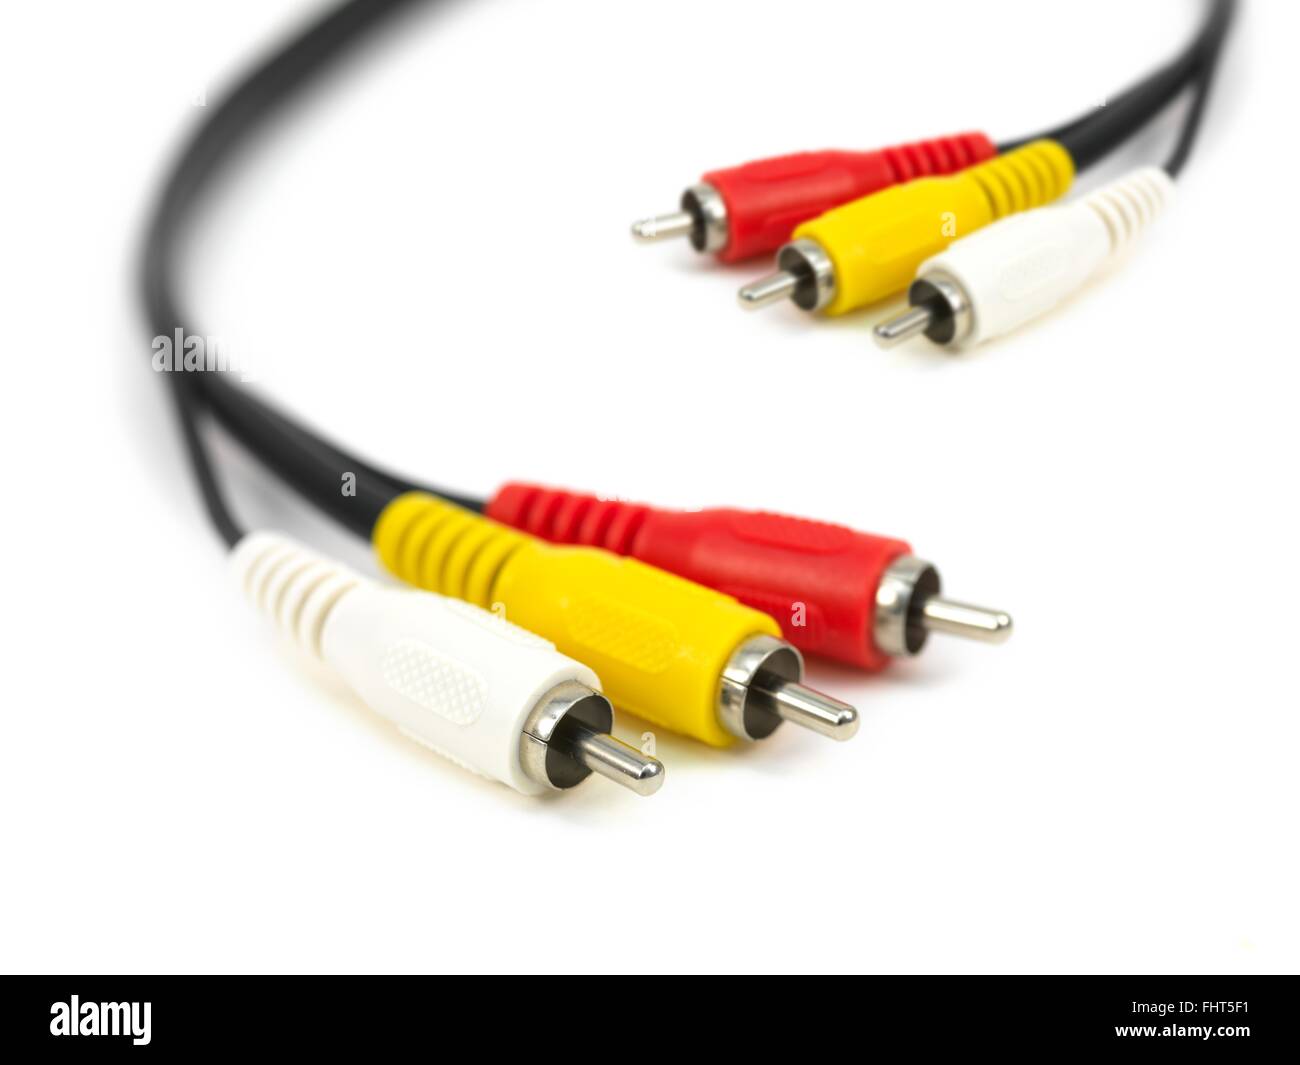 5,082 Rca Cable Images, Stock Photos, 3D objects, & Vectors